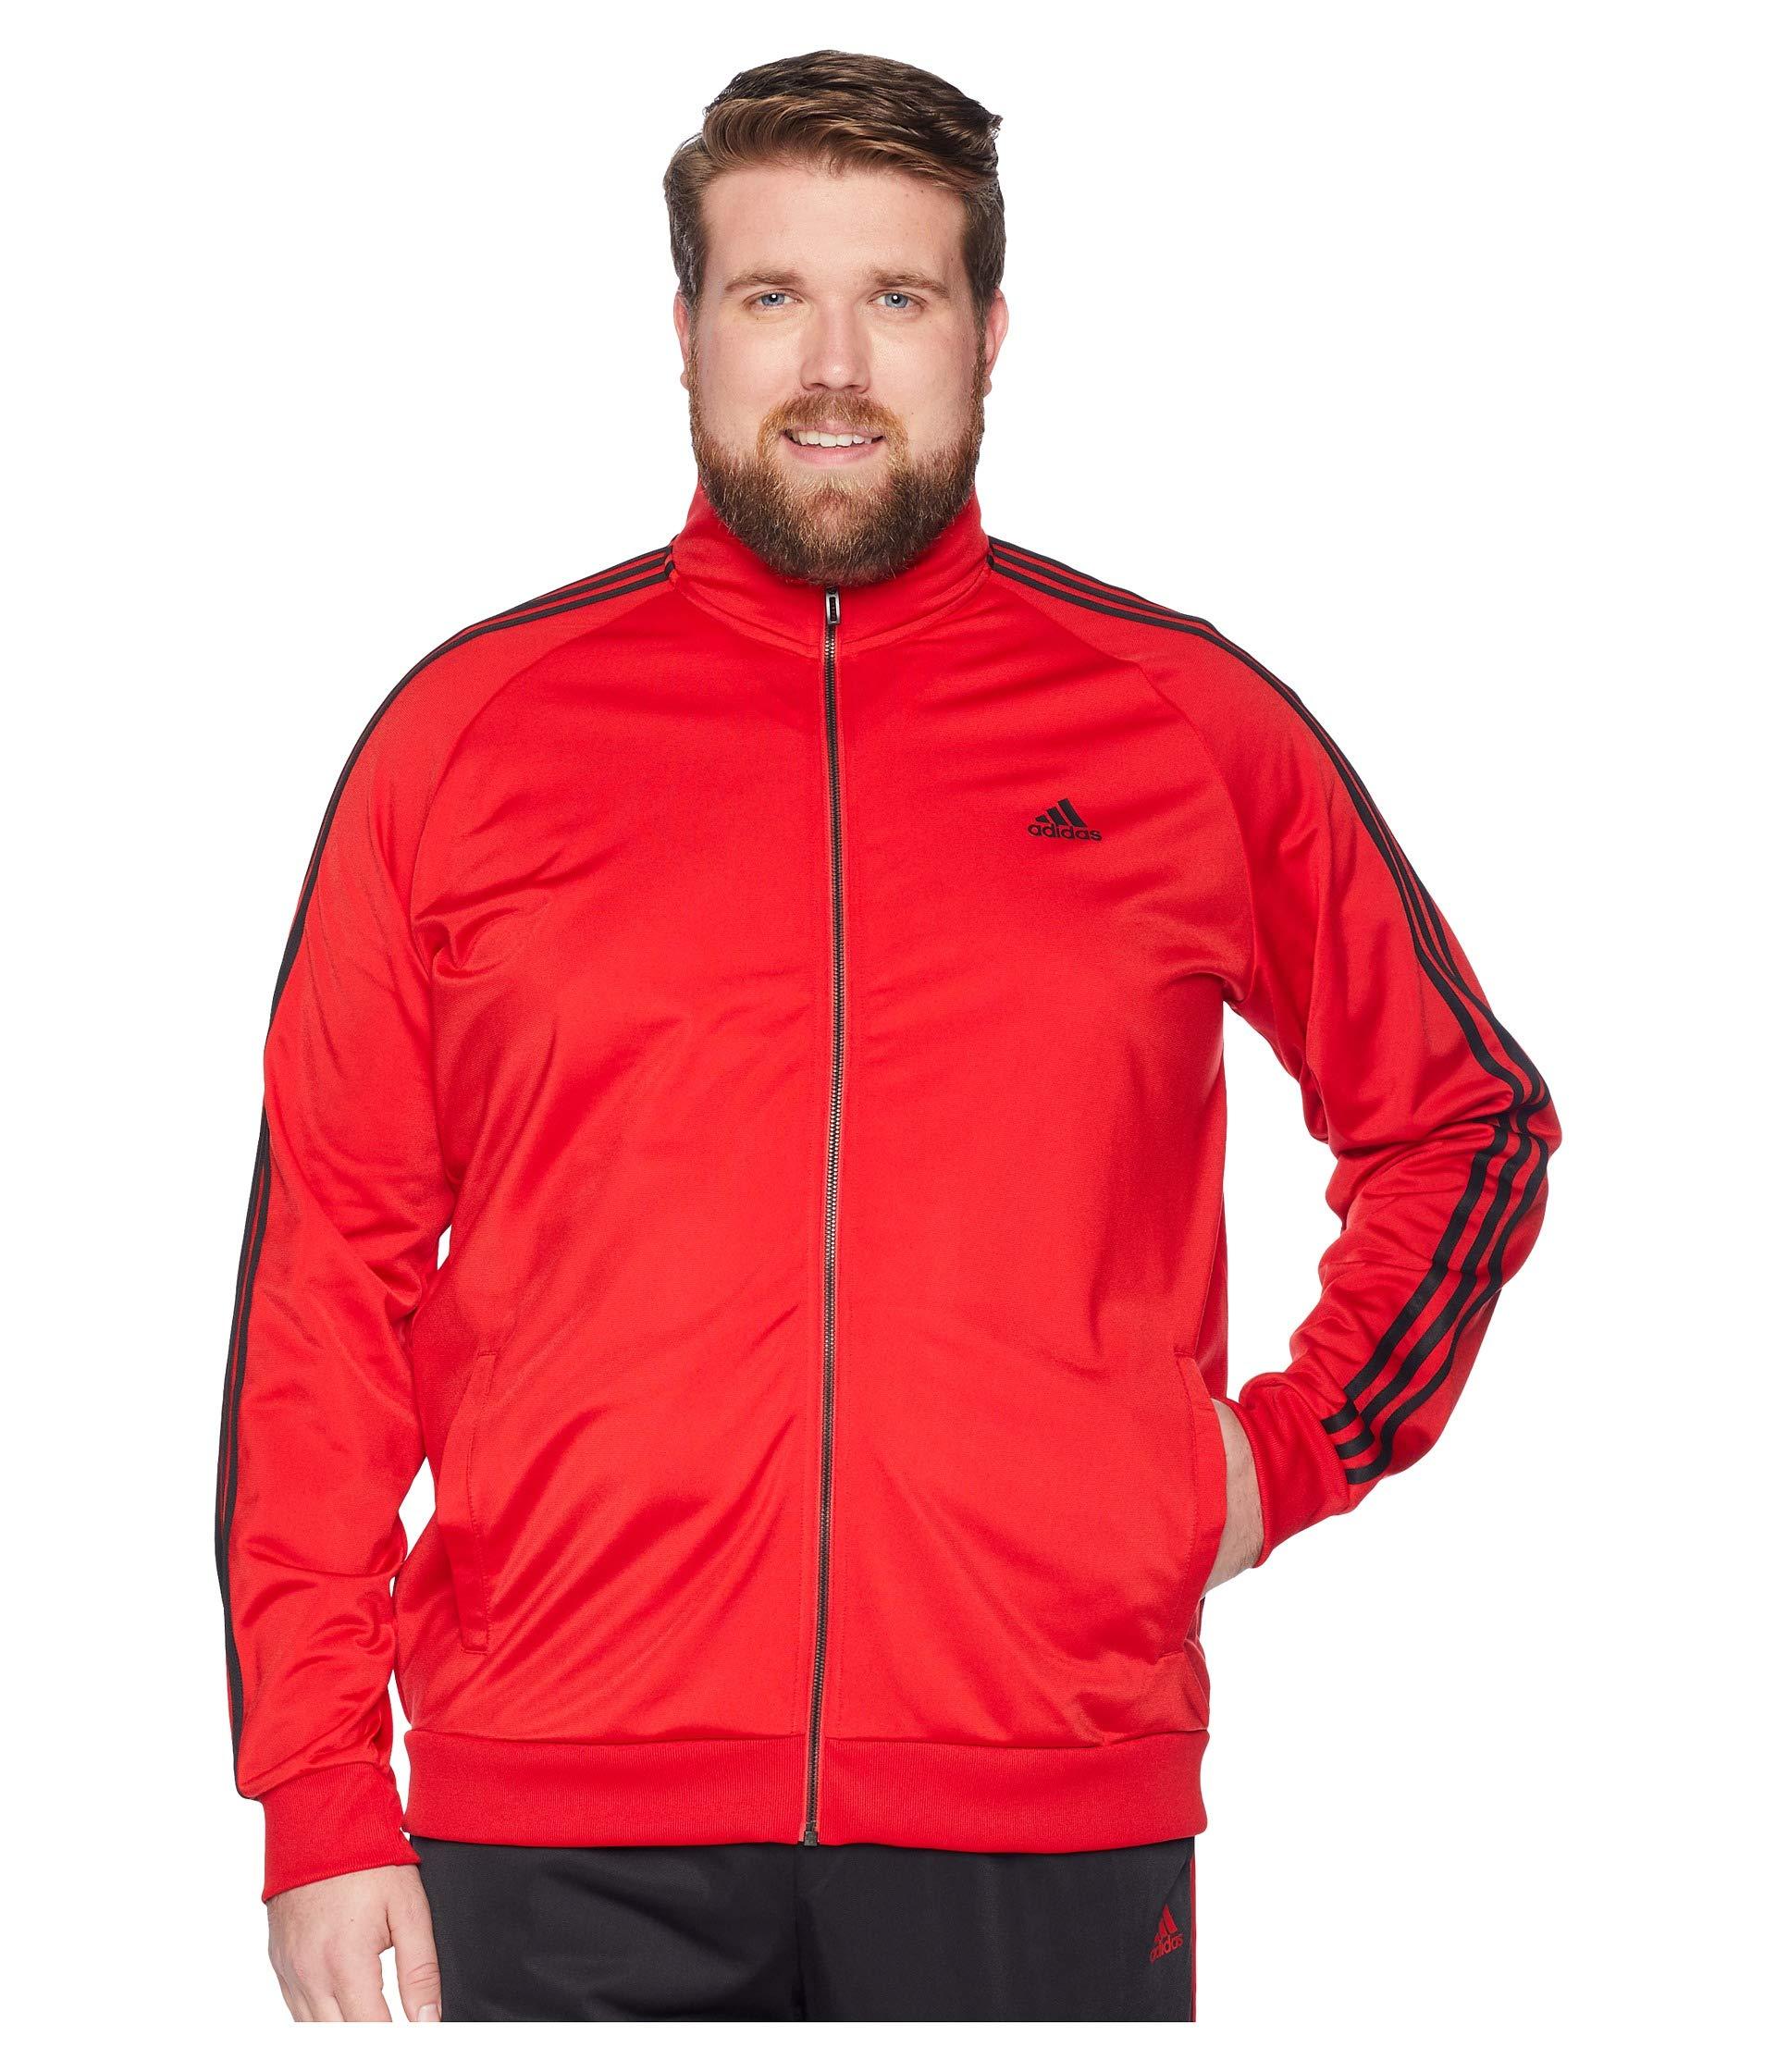 Lyst - adidas Big & Tall Essentials 3-stripes Tricot Track Jacket in Red for Men